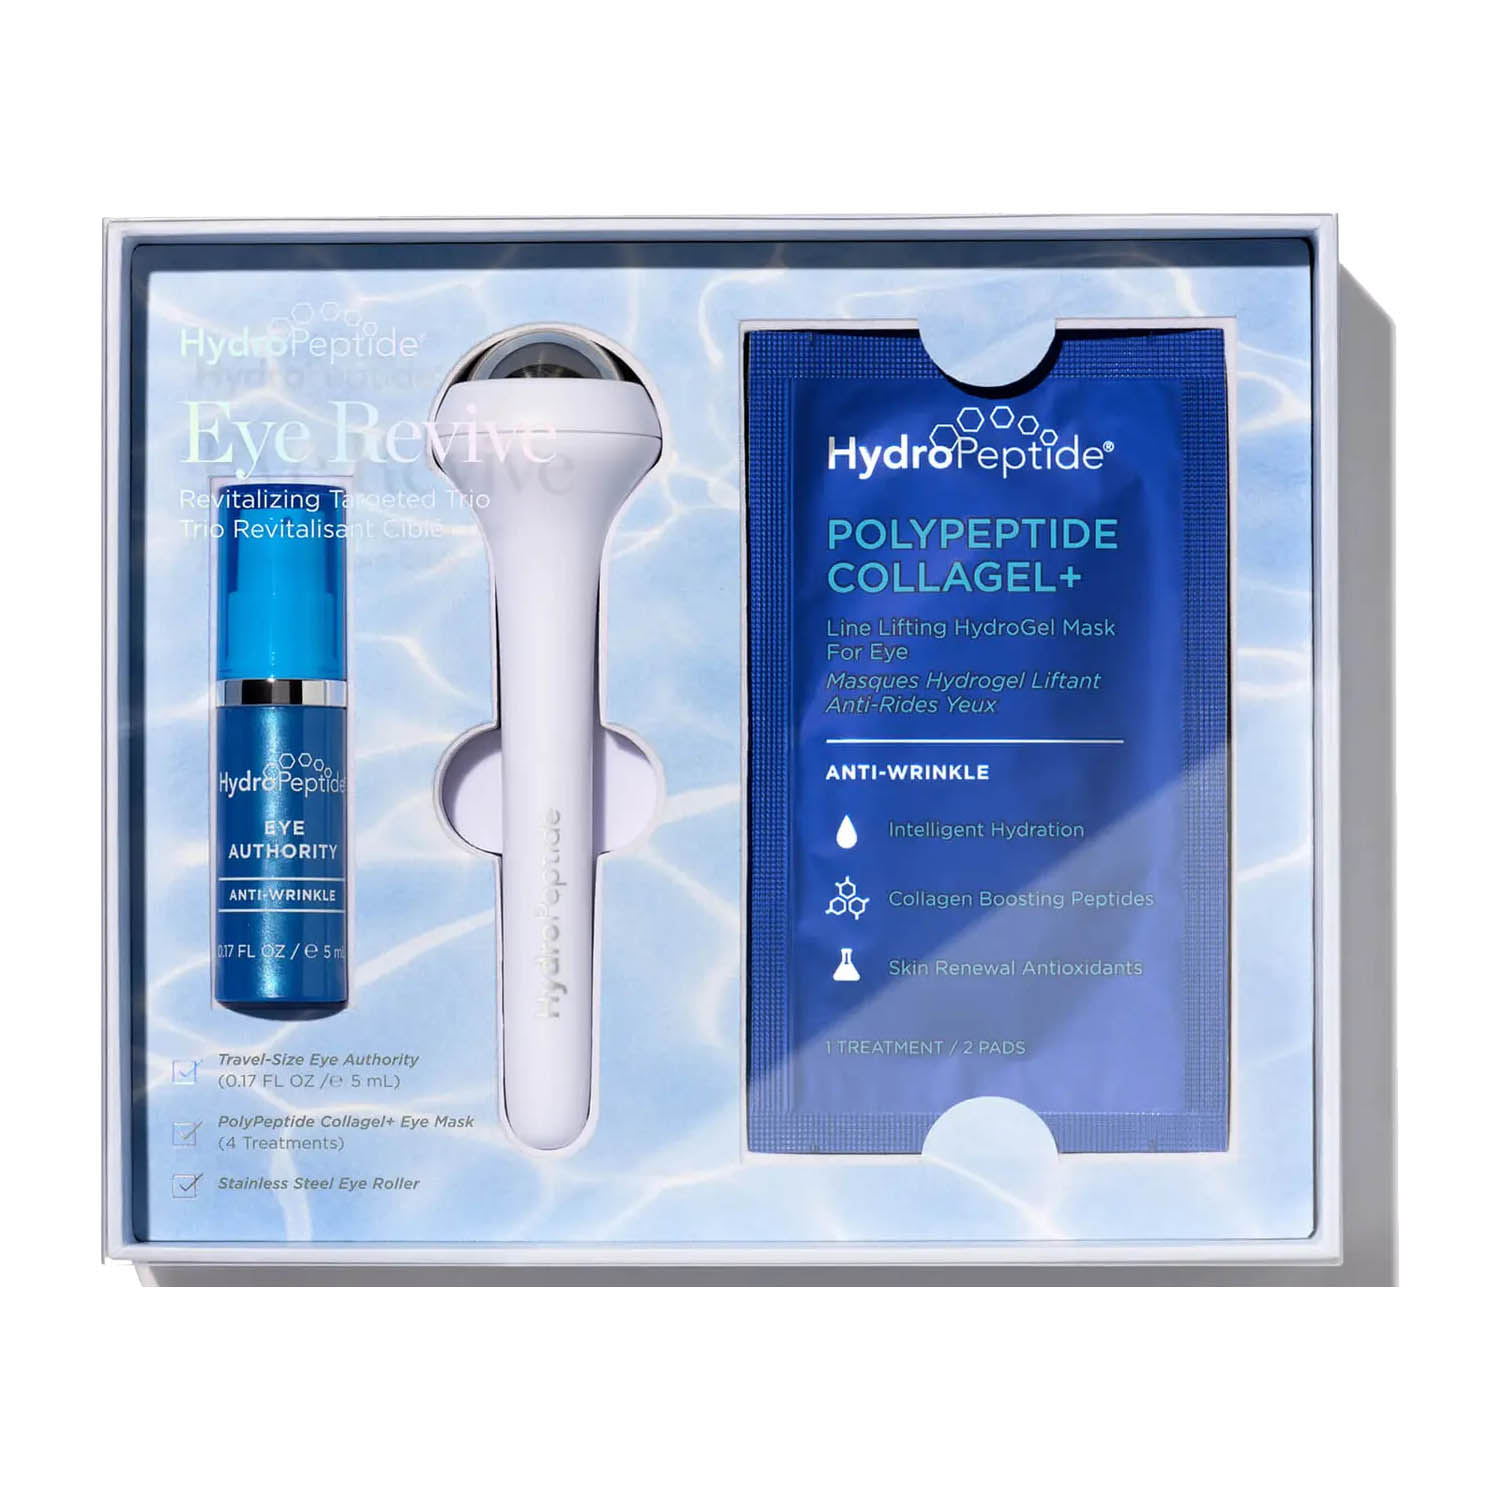 Hydropeptide Eye Revive - Revitalizing Targeted Trio